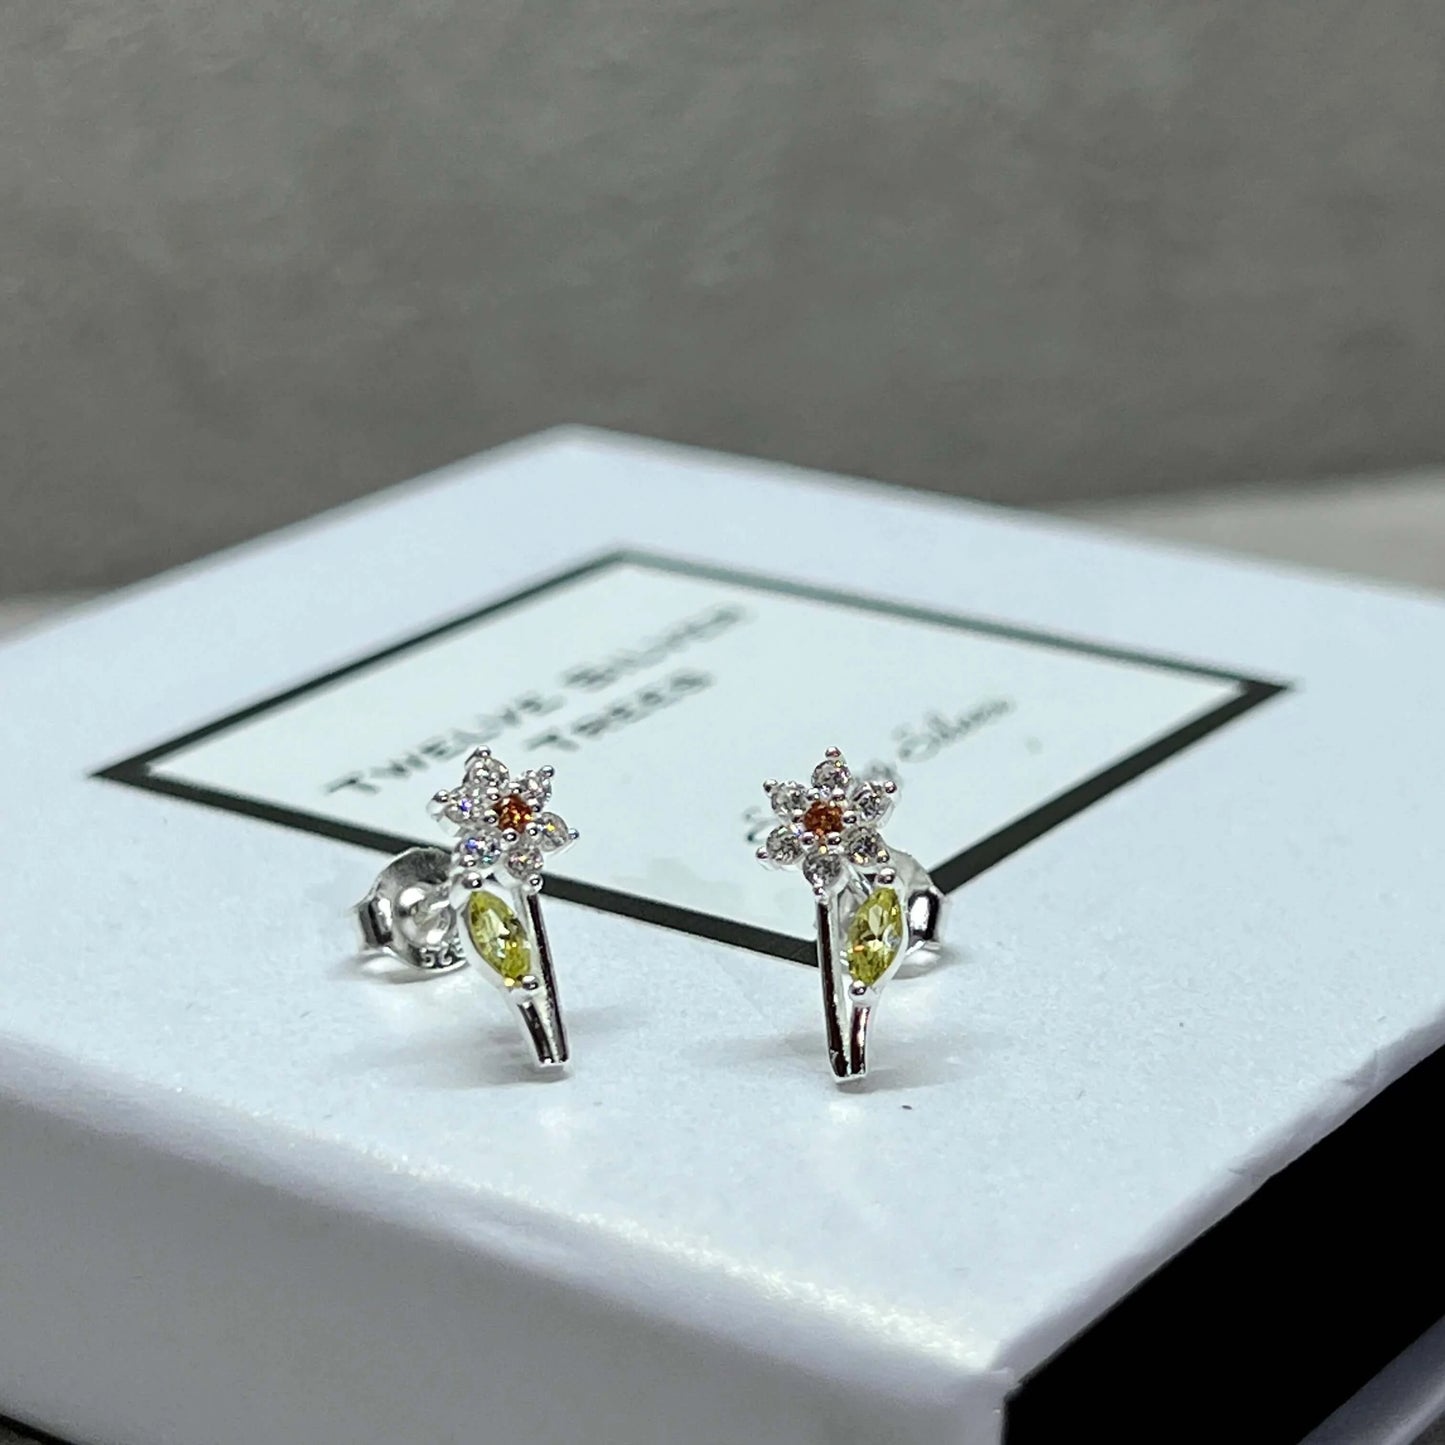 Dainty Daffodil Stud Earrings with Coloured Zirconia in Sterling Silver. - Twelve Silver Trees